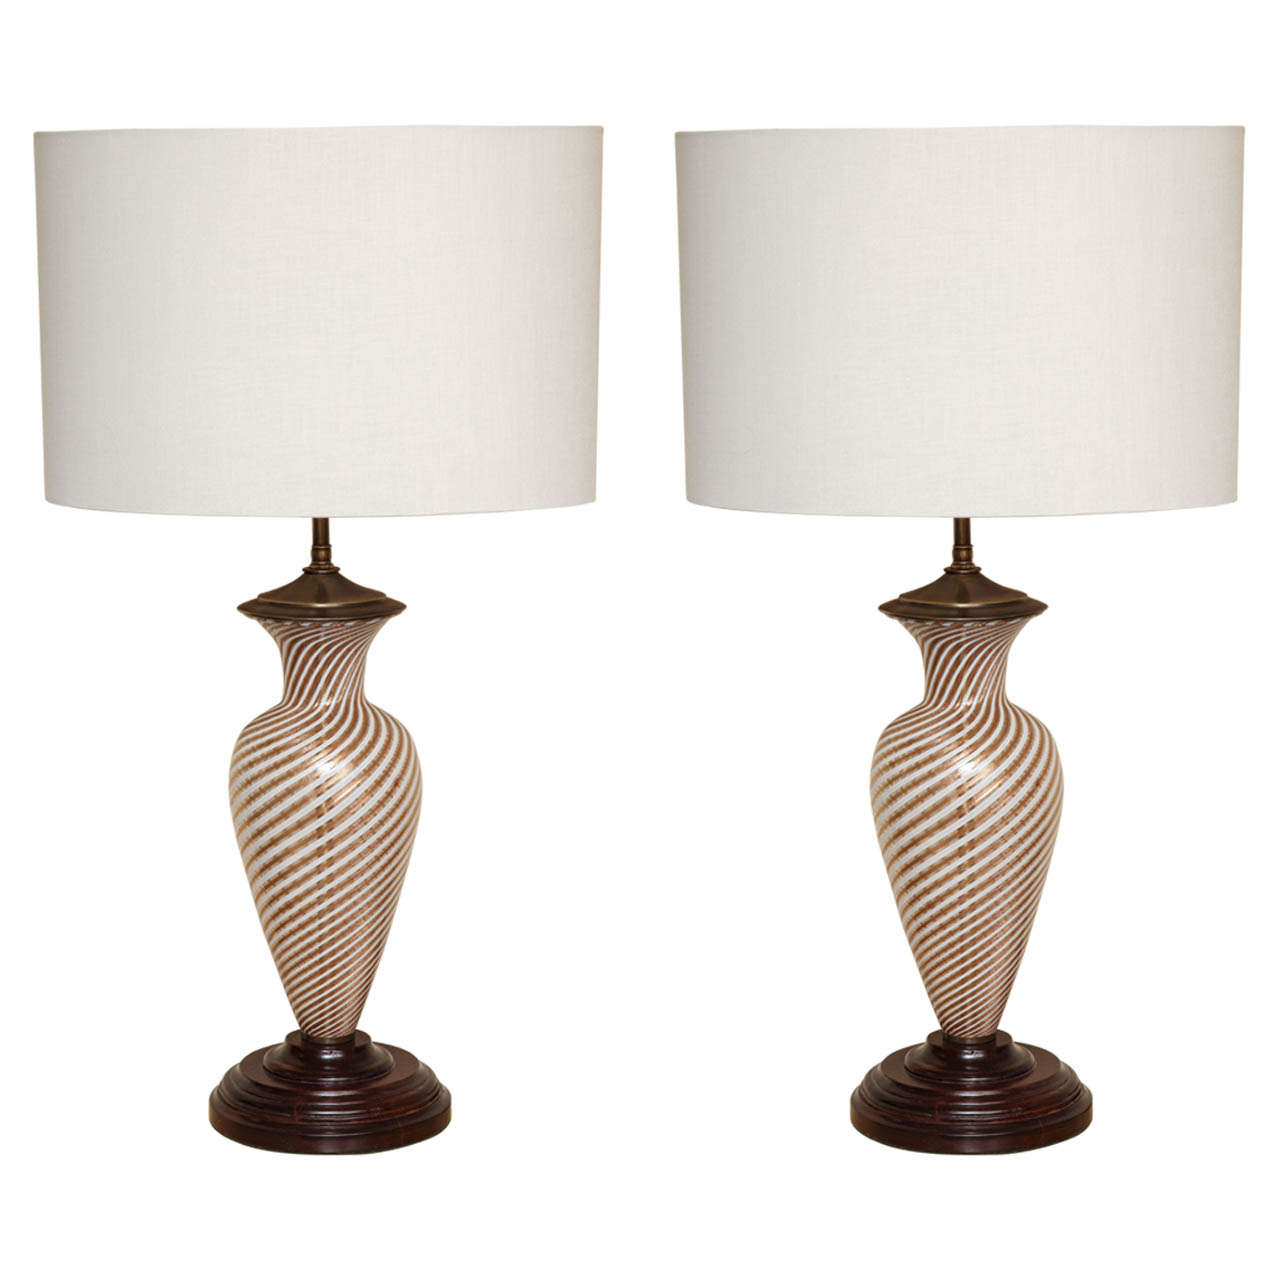 Pair of Murano Lamps with Wood Base, Italy, circa 1960